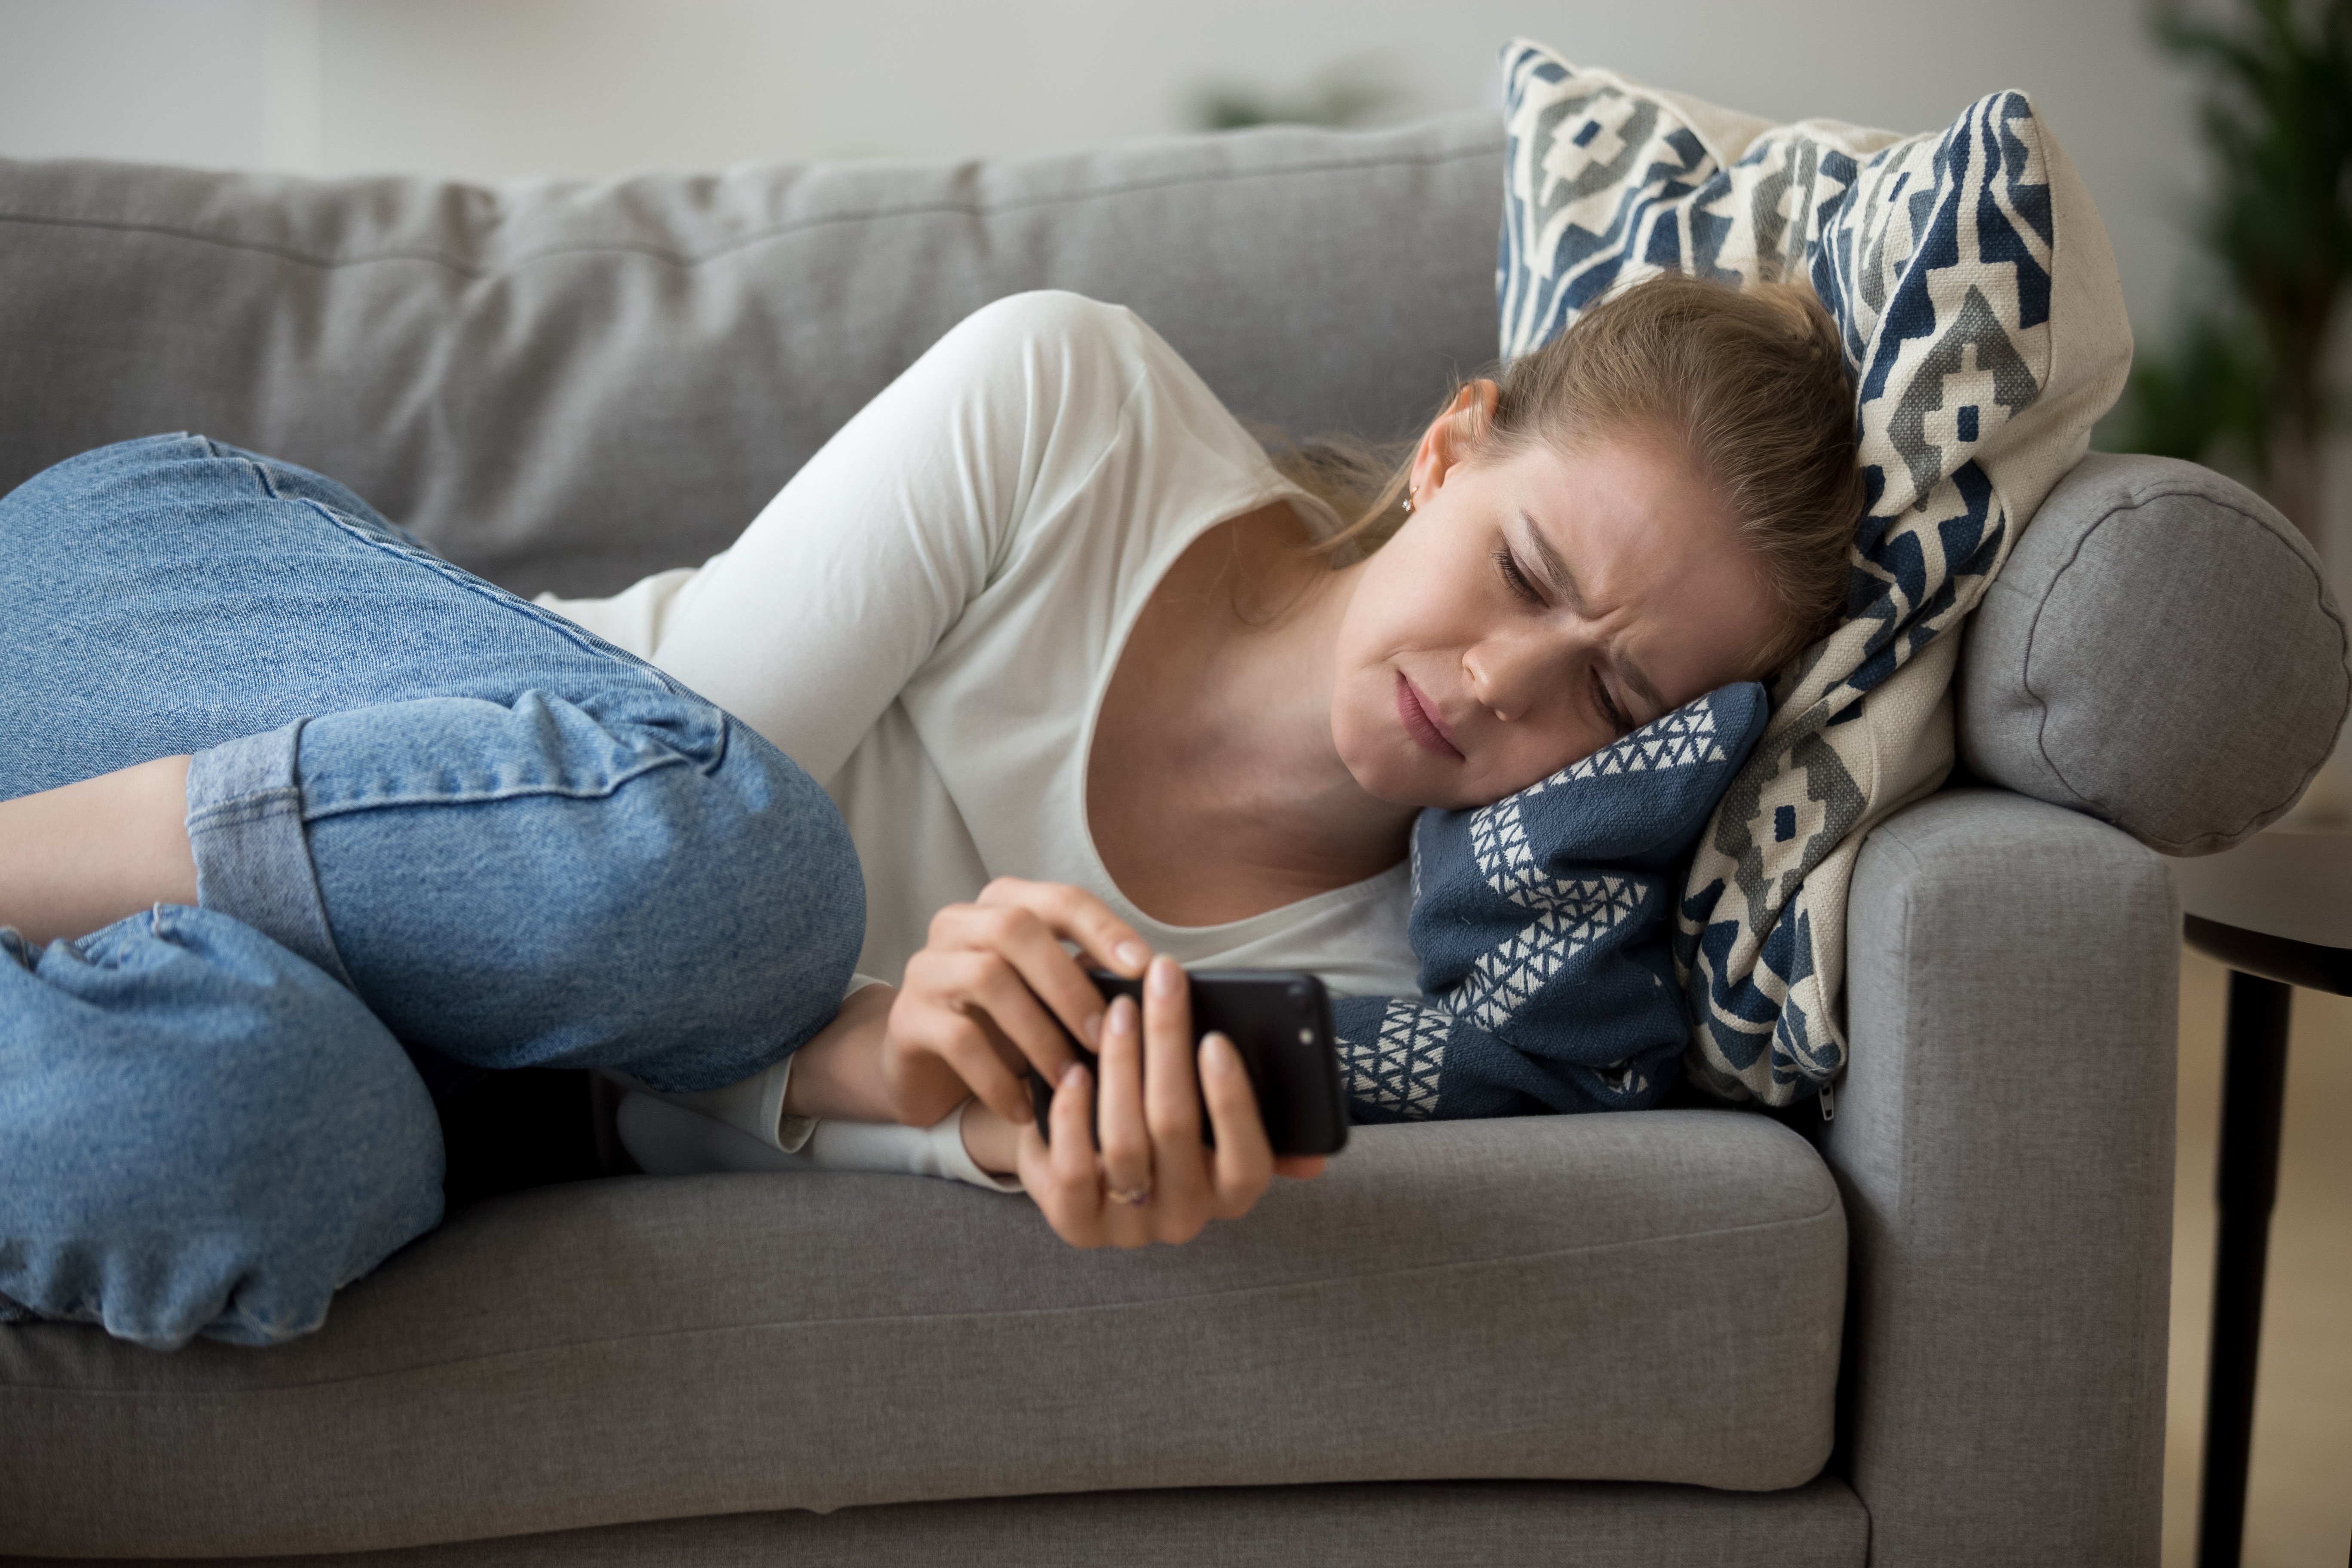 A young woman crying on a couch | Photo: Shutterstock